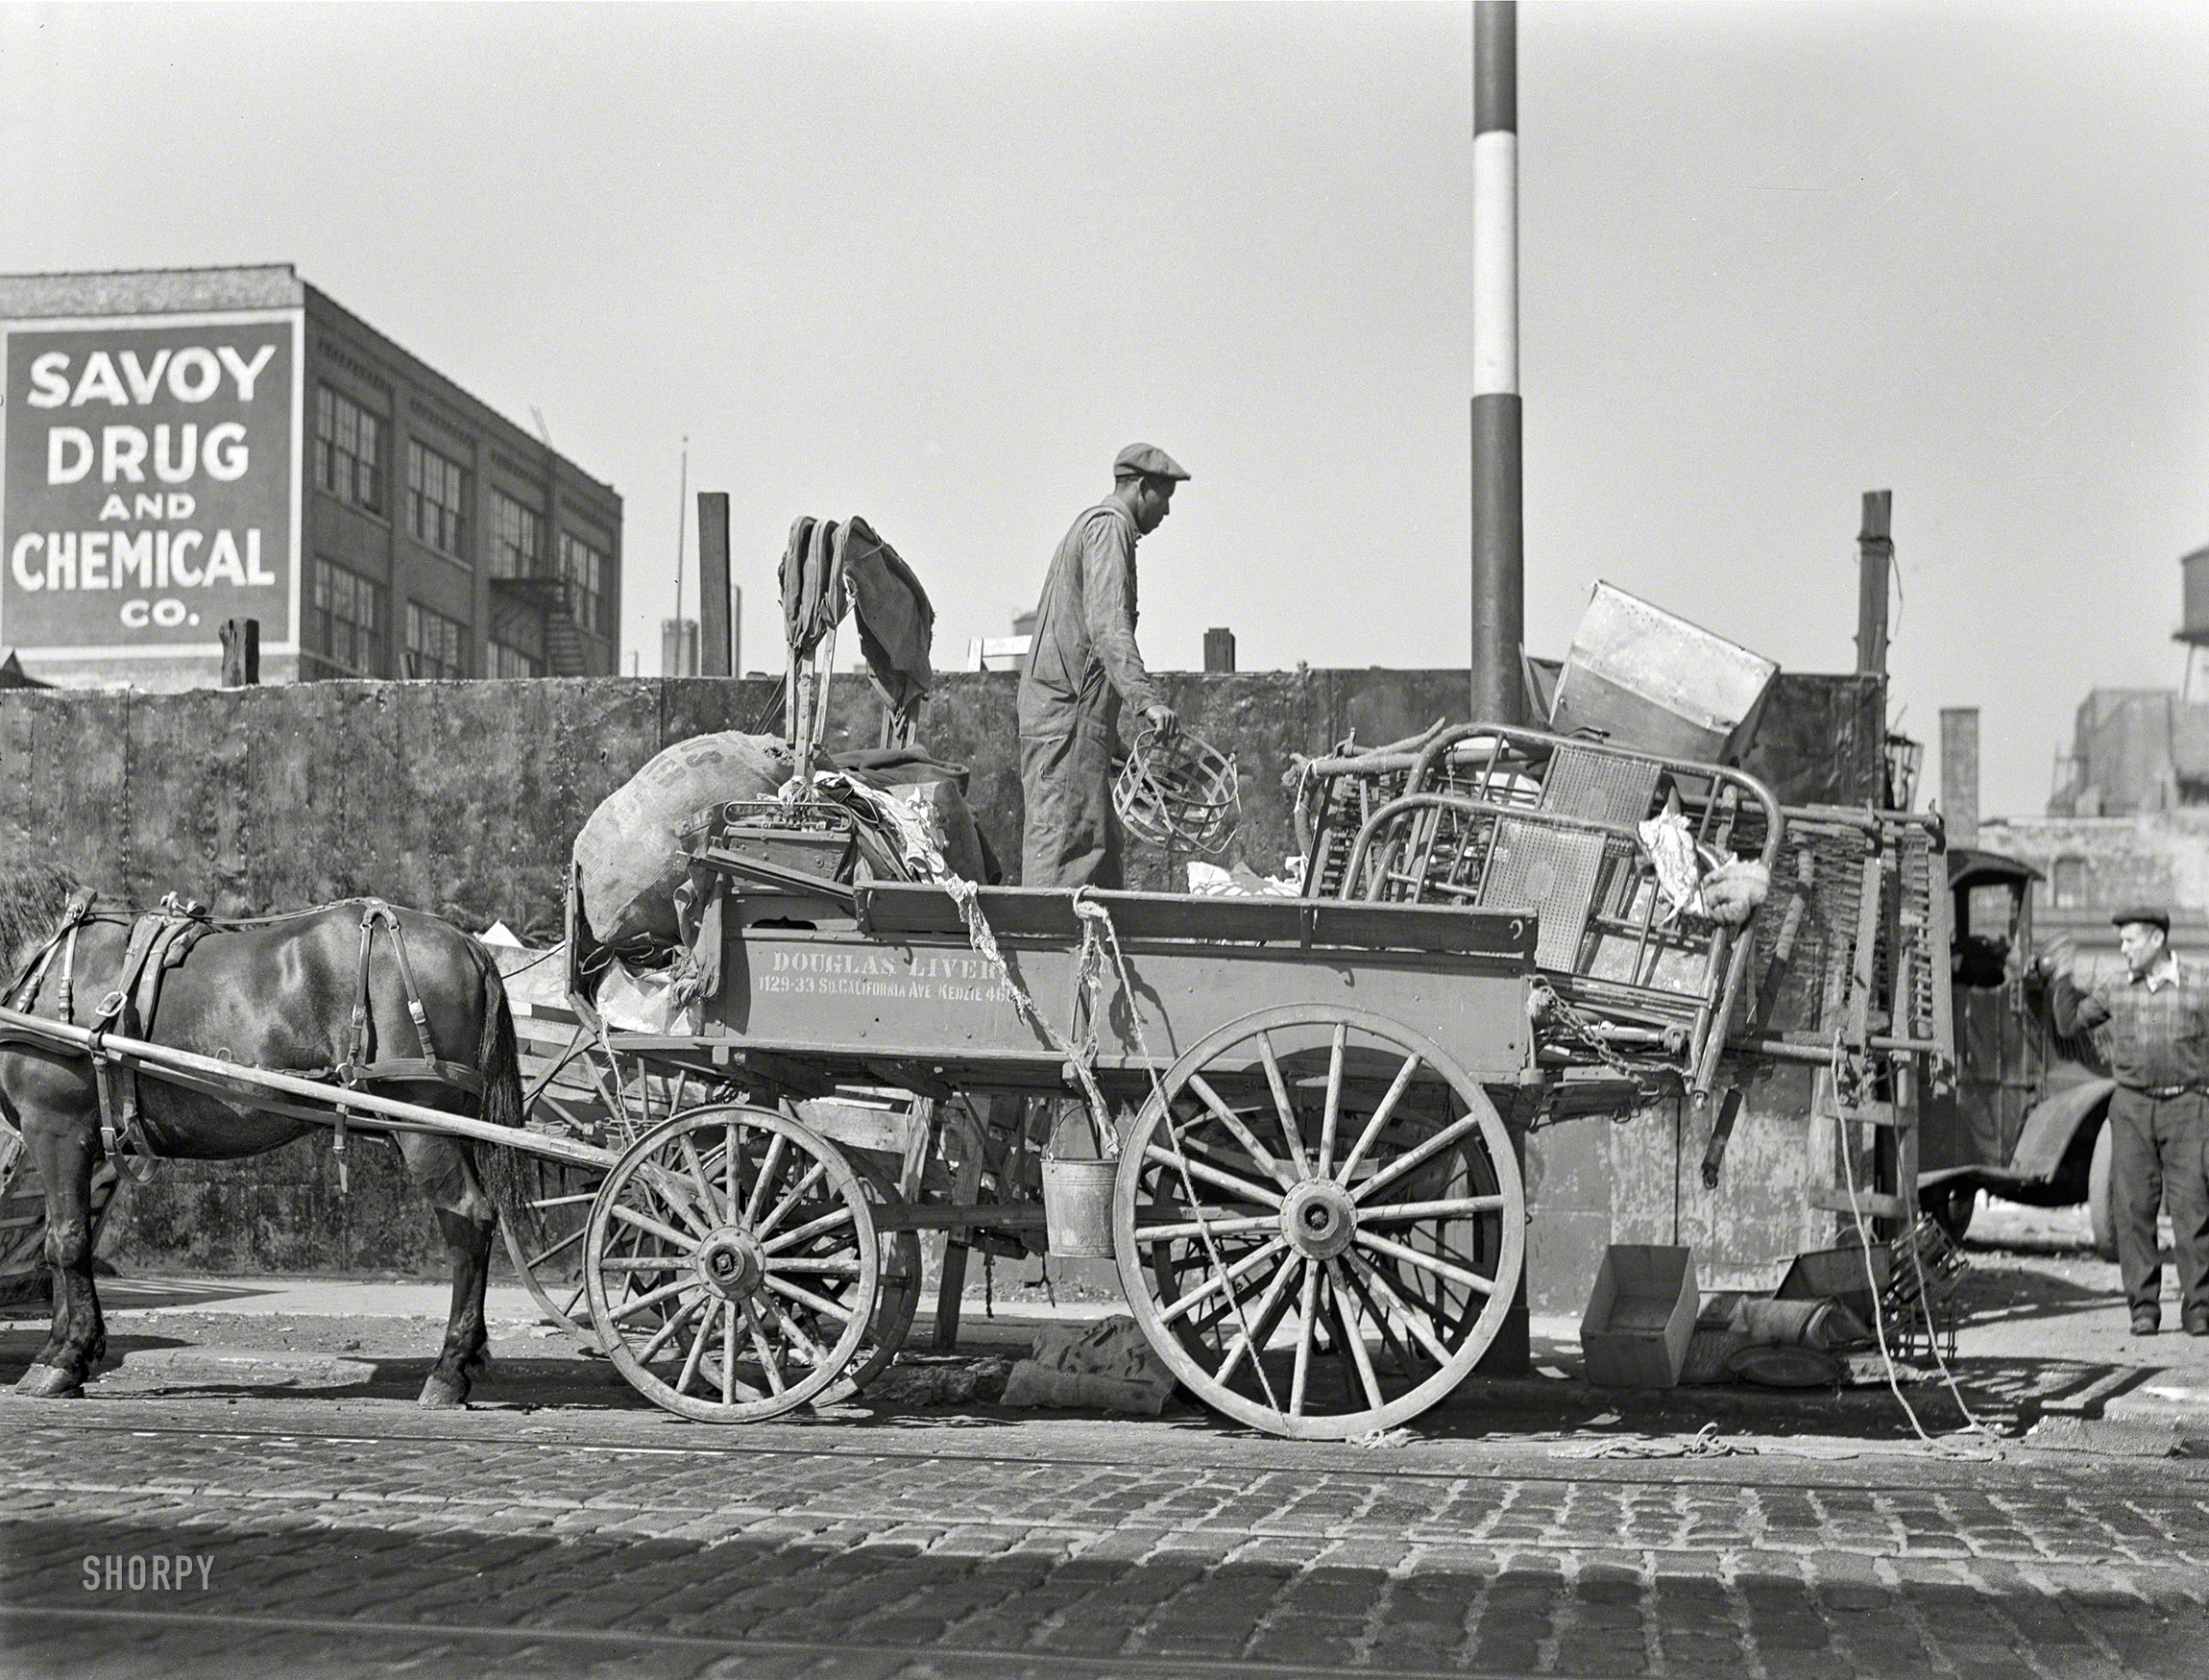 October 1942. Chicago, Illinois. "Salvage. To feed the nation's munitions furnaces, tons of scrap from America's attics and basements are collected every day. Here, a junkman unloads his wagon in a central depot, where the scrap will be segregated and graded for shipment to steel mills." Medium format nitrate negative  by Ann Rosener for the Office of War Information. View full size.